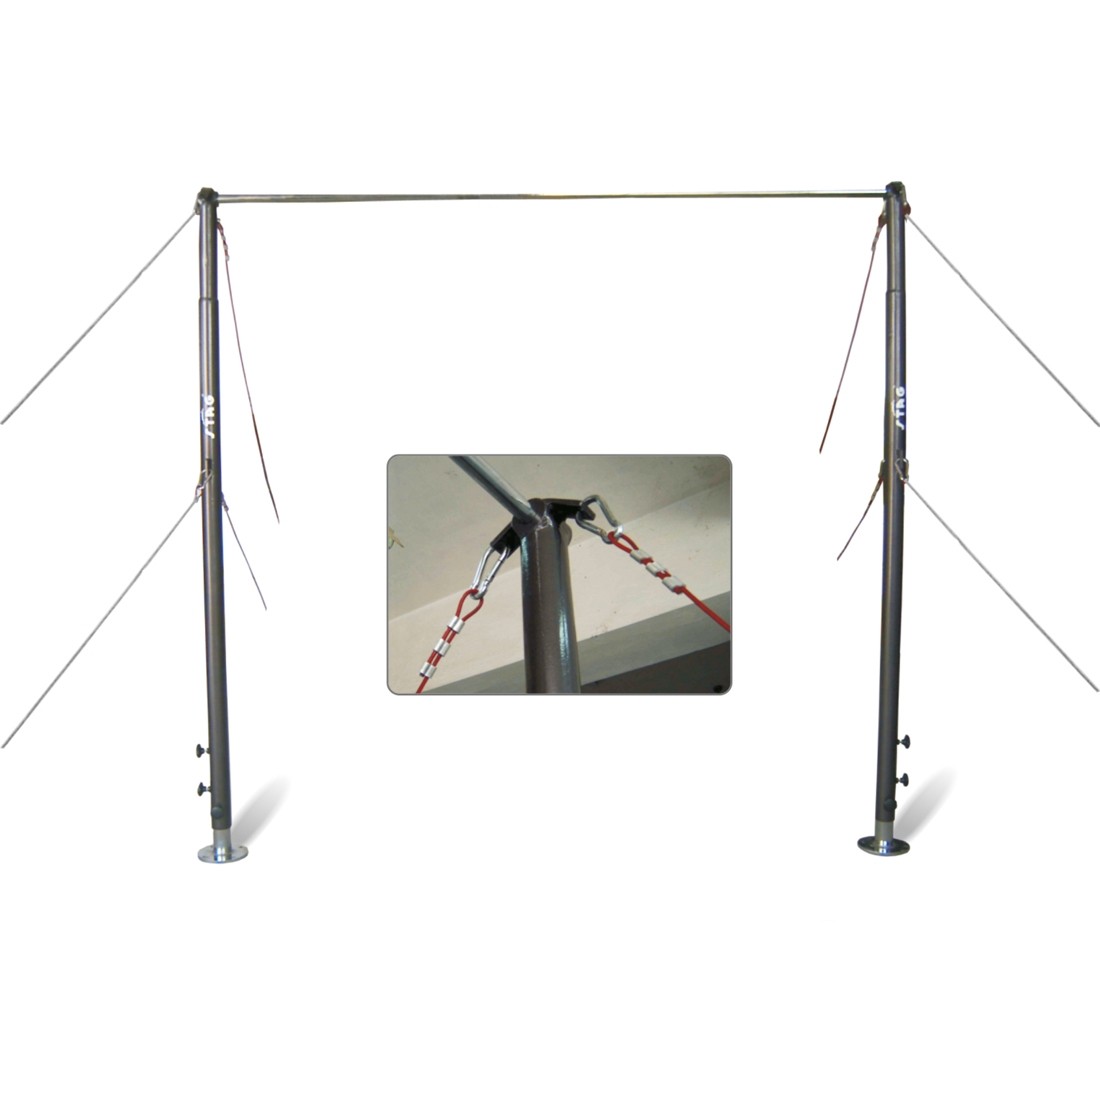 STAG HORIZONTAL BAR COMPETITION ADJUSTABLE HEIGHT 2.50MTR TO 2.95MTR